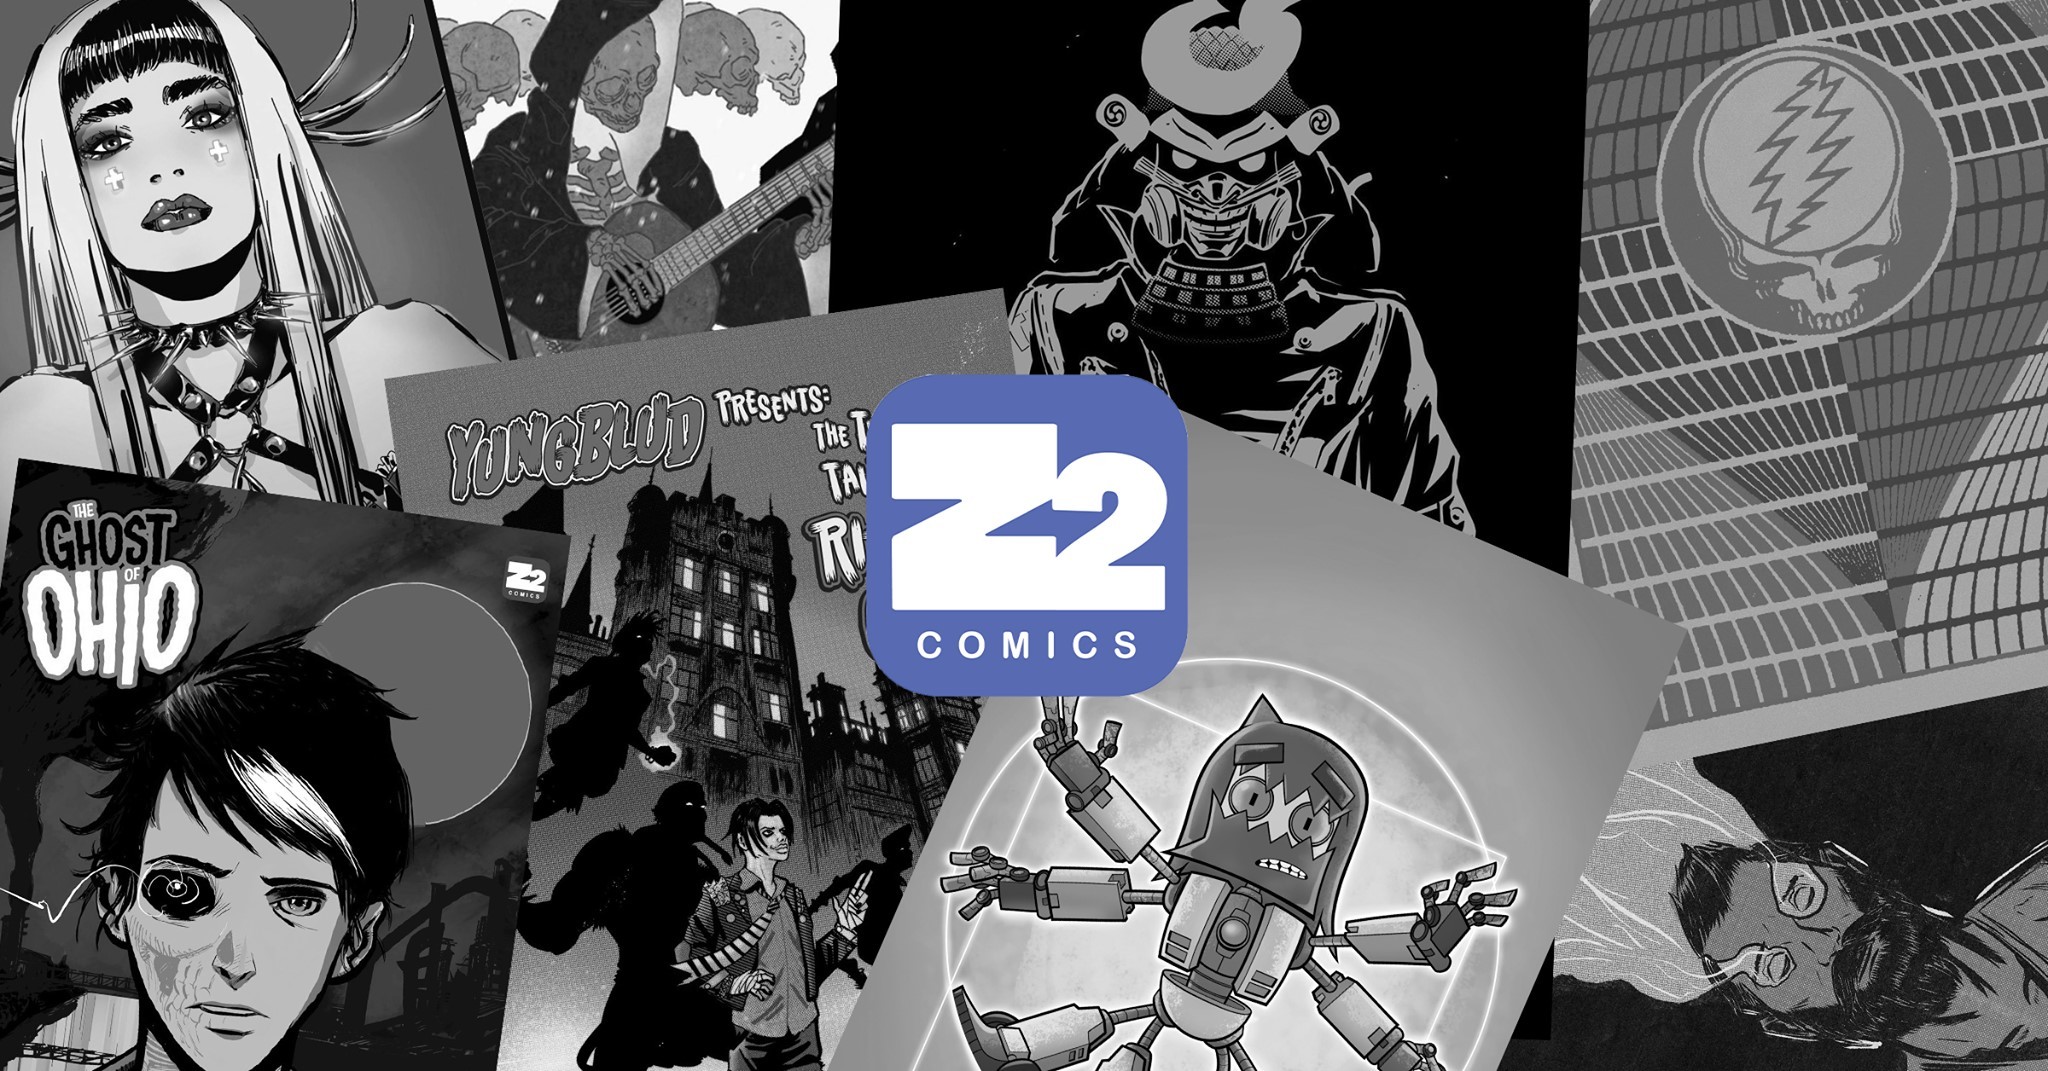 Z2 Comics logo on the background of comic book posters